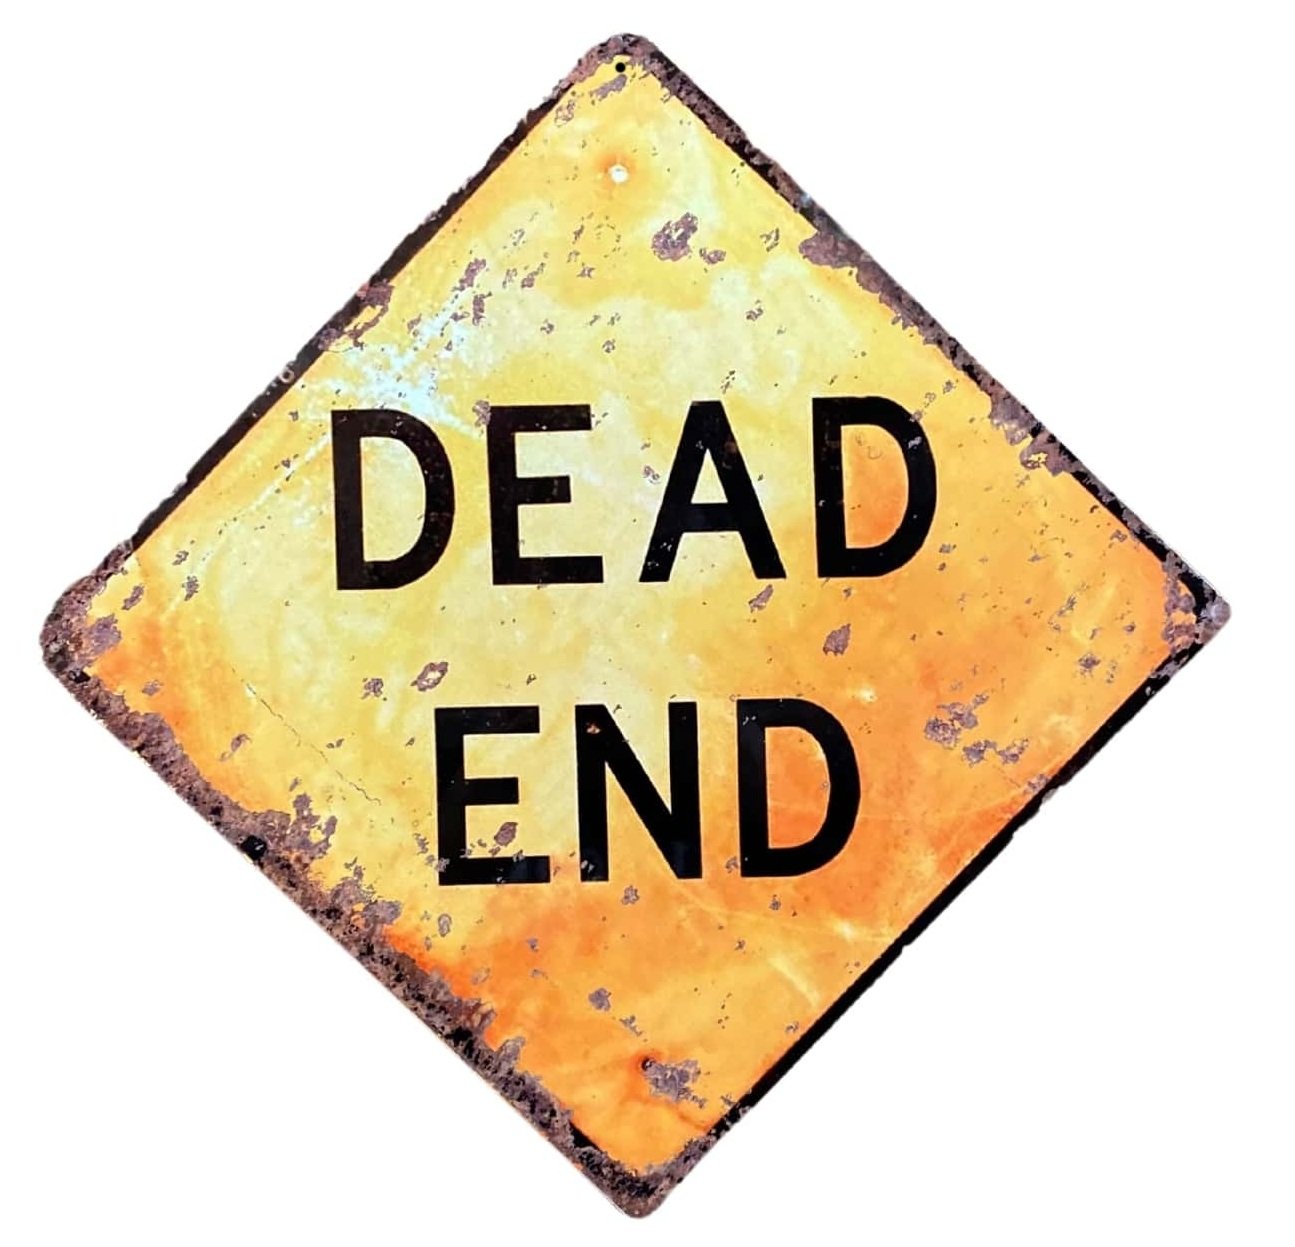 Metal Square Wall Sign - Dead End